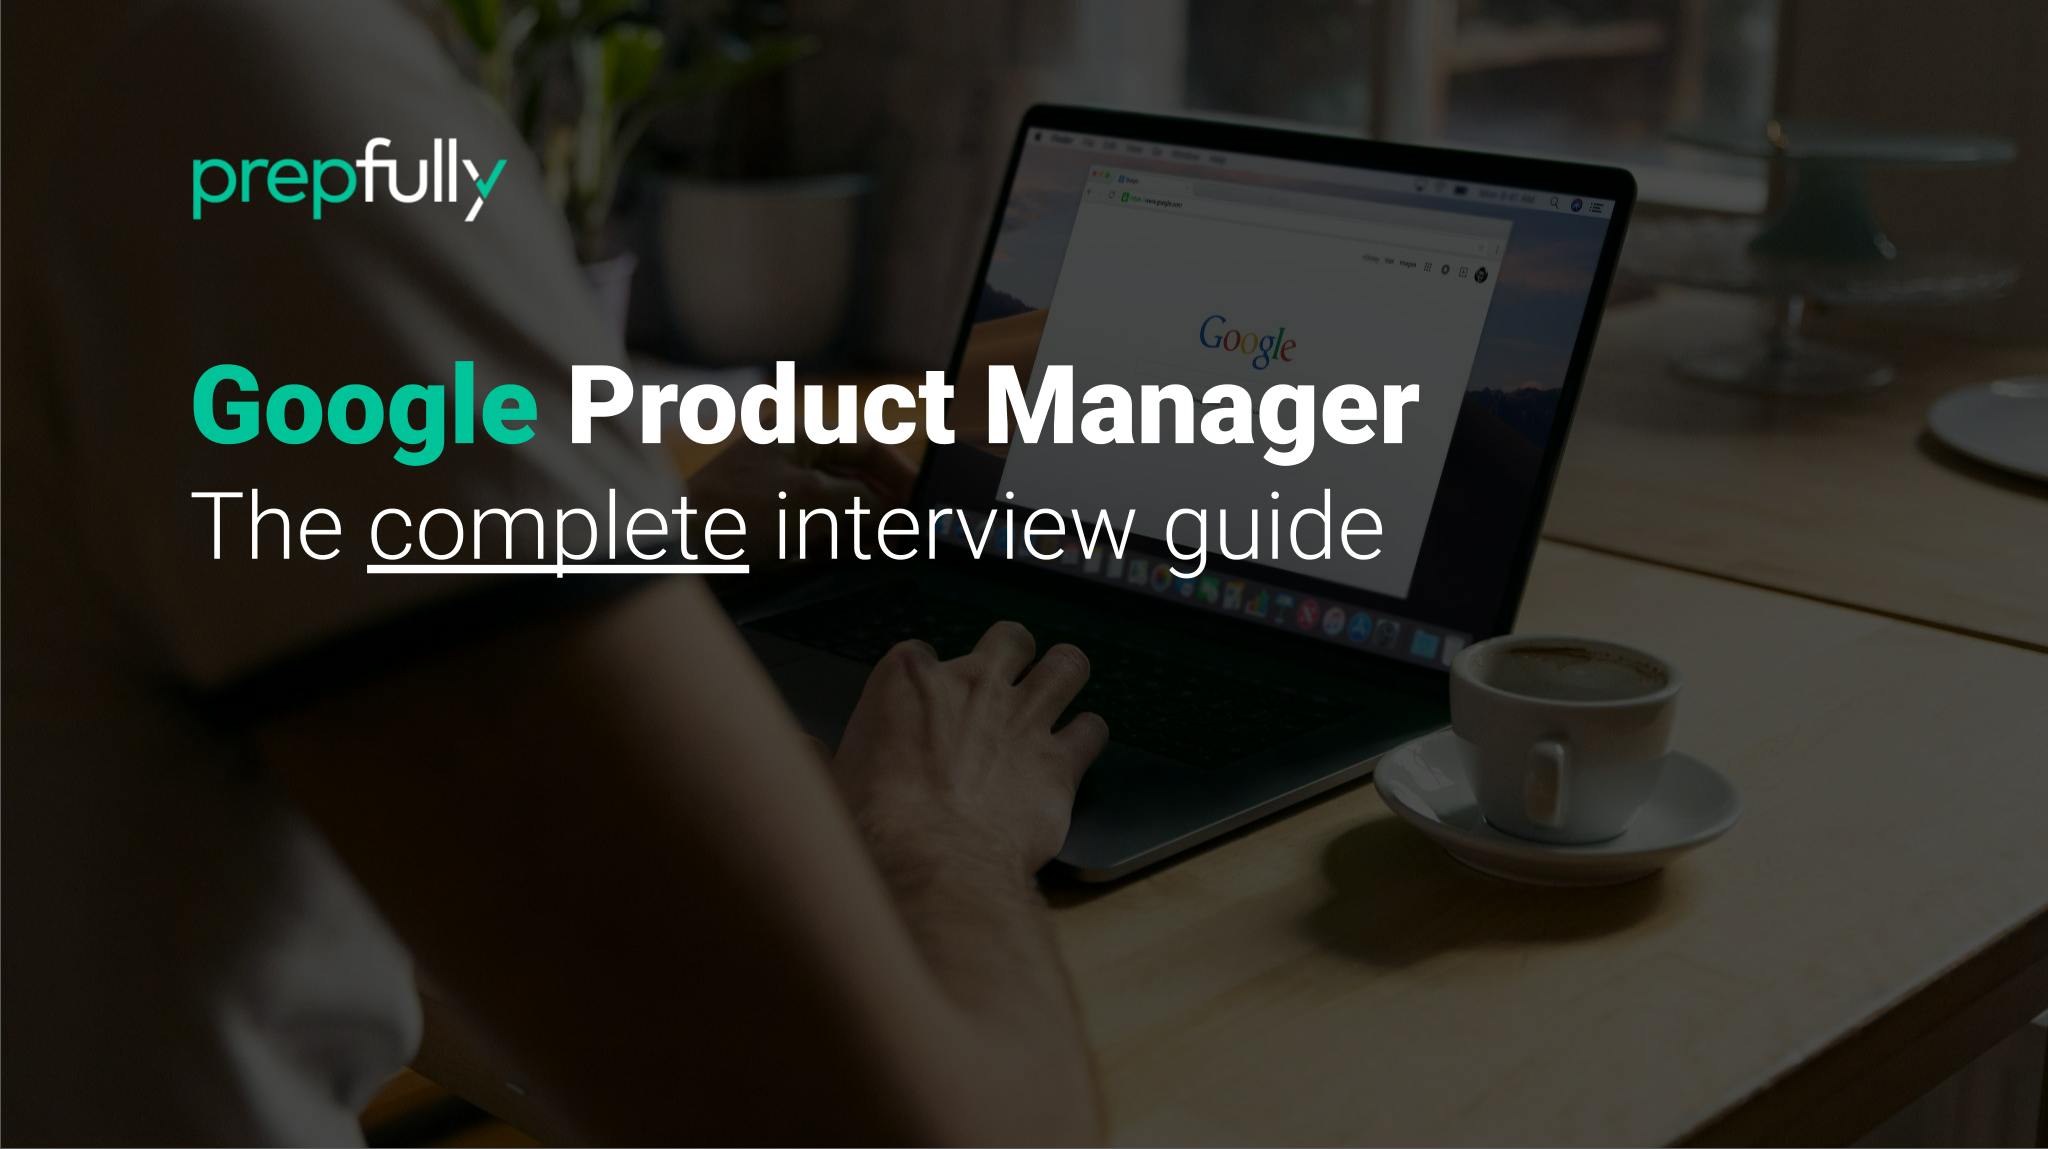 Interview guide for Google Product Manager